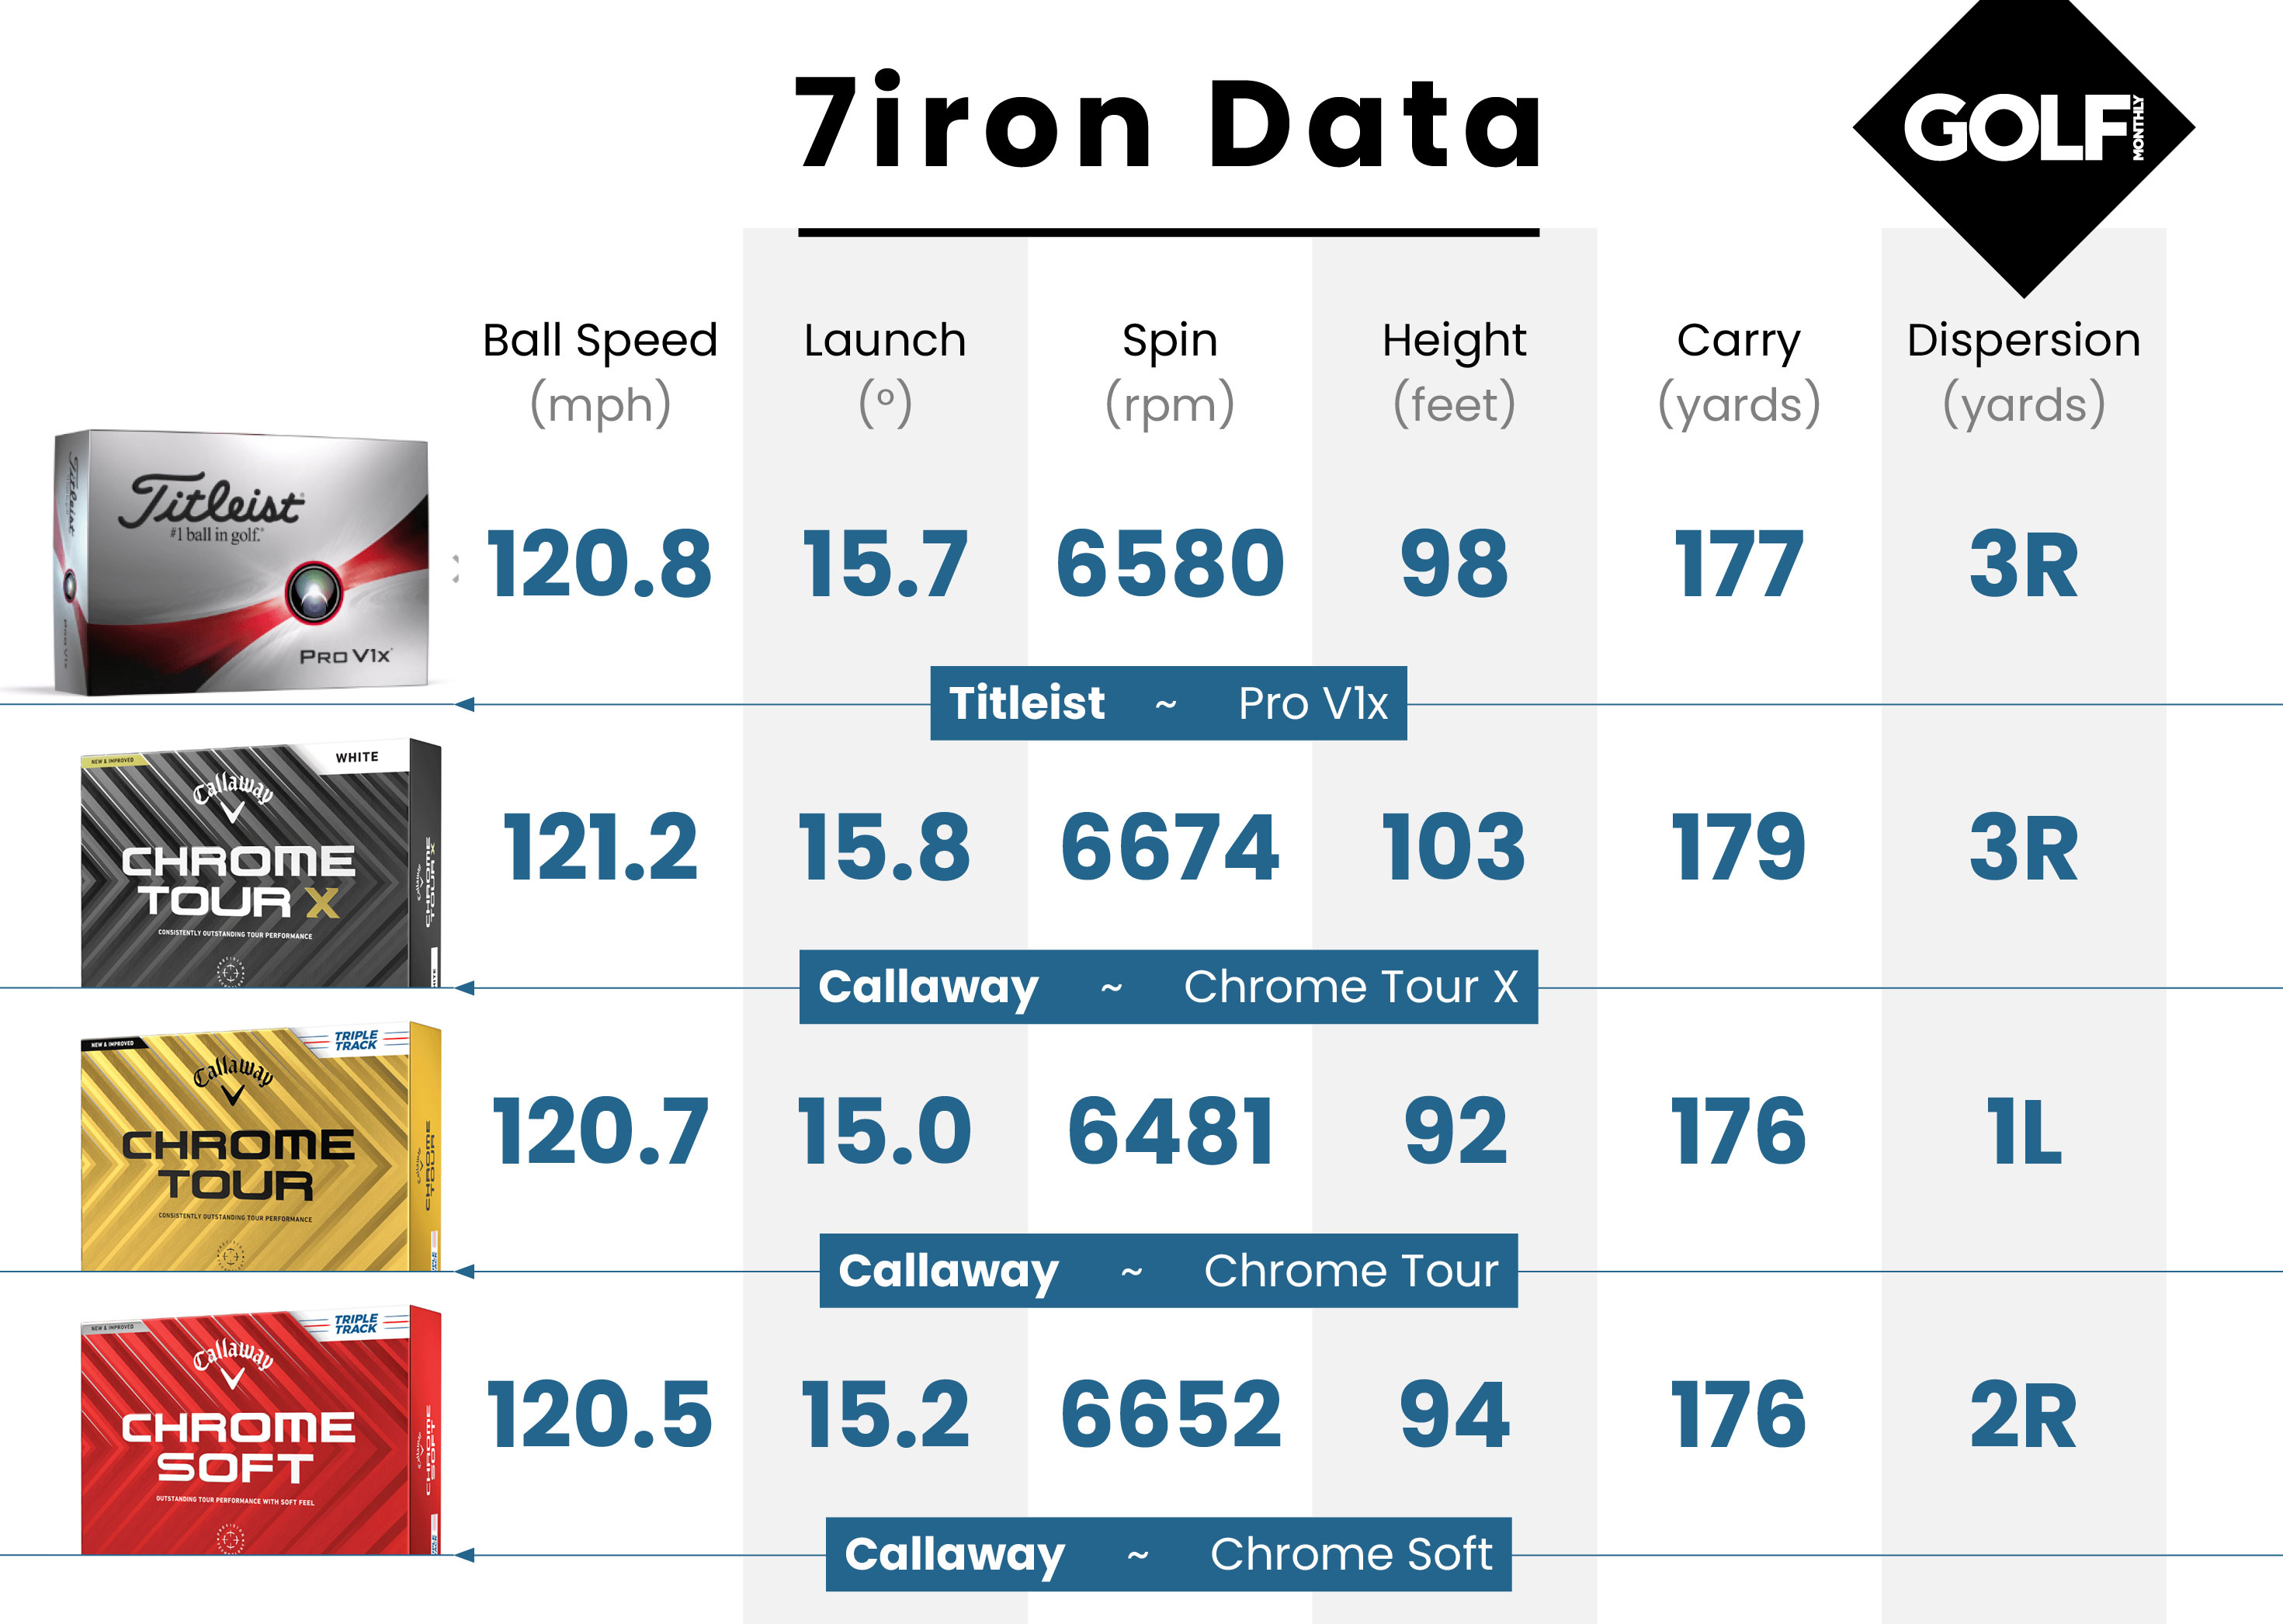 Photo of the 7 iron data for the Chrome soft golf ball